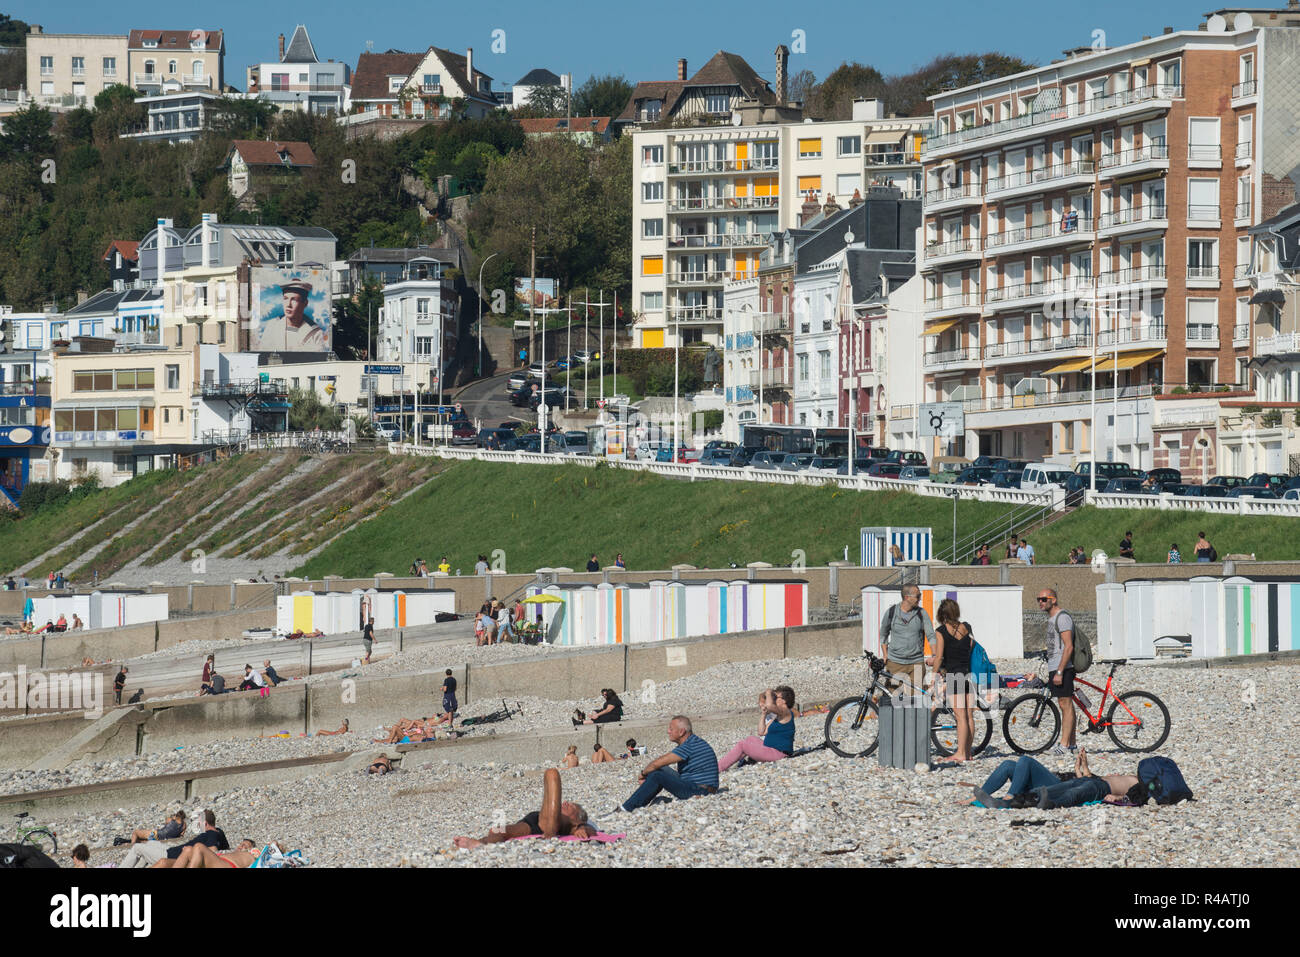 Le Havre (Normandy, north western France): Inhabitants of Le Havre on the beach and overview of the houses along the waterfront at Sainte-Adresse Stock Photo